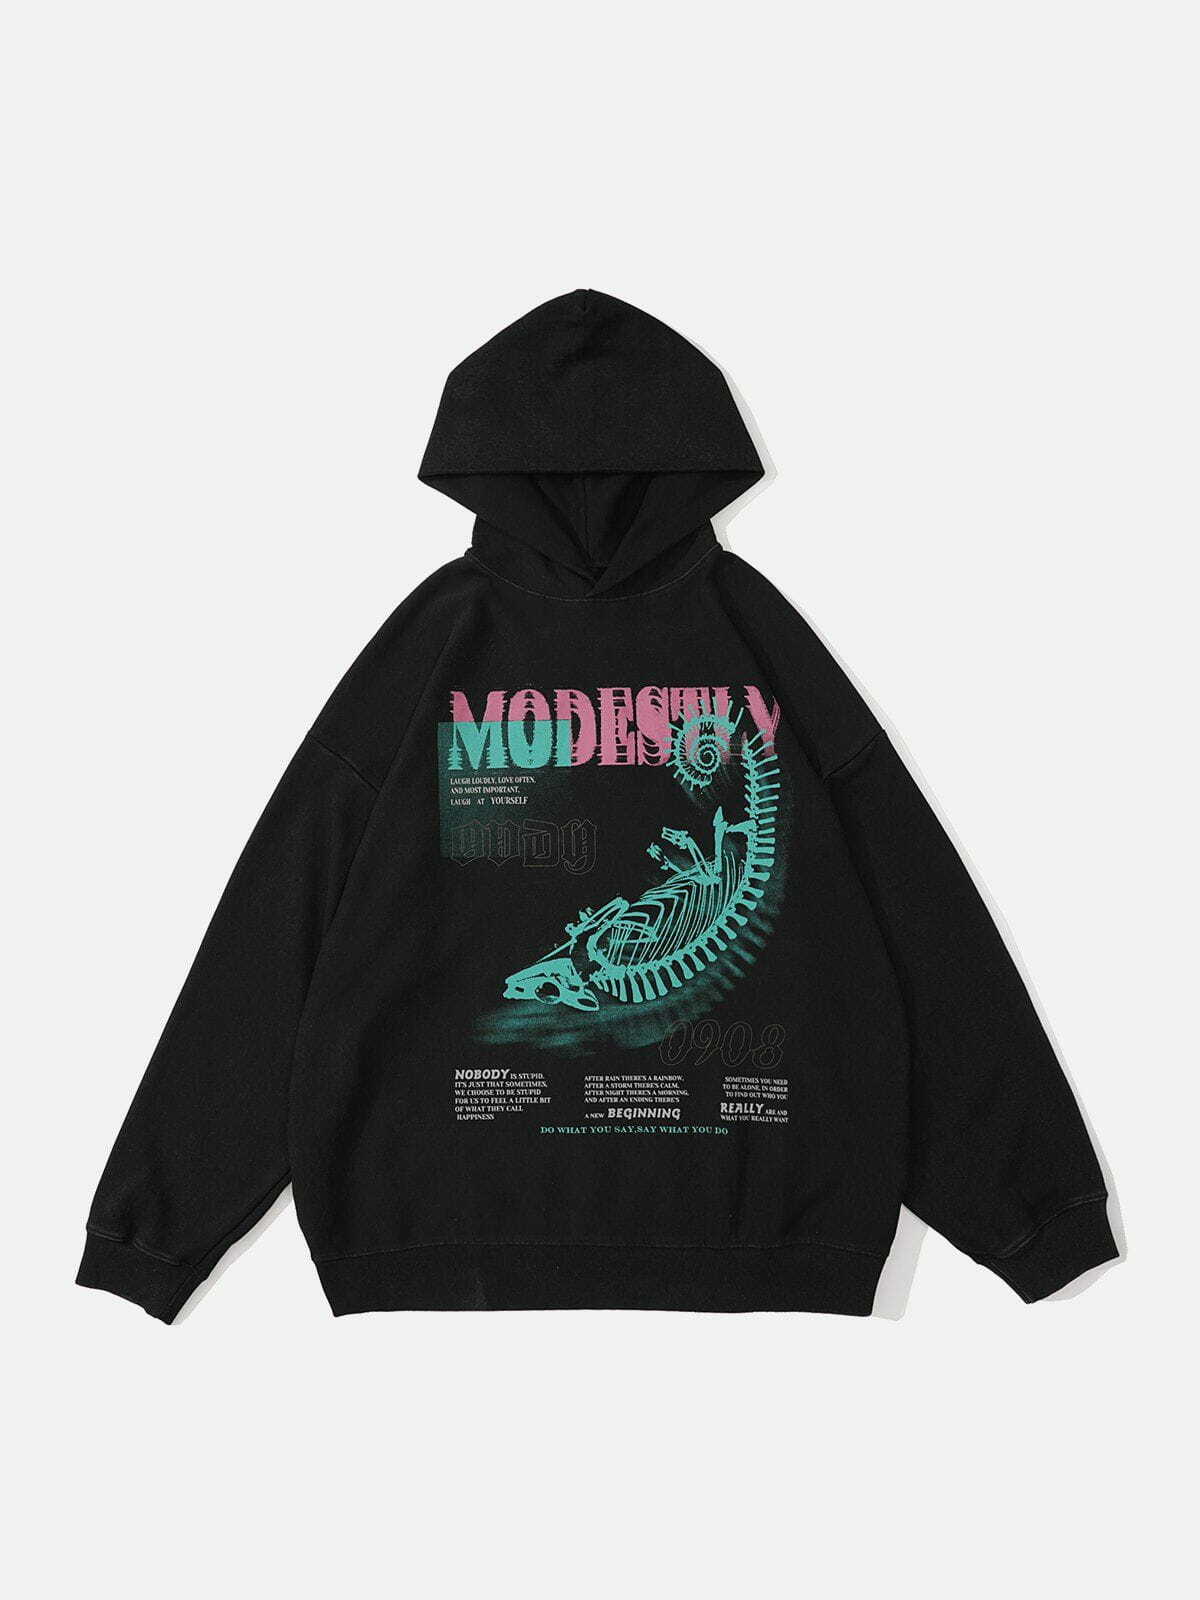 washed chronofossil print hoodie edgy streetwear 1458